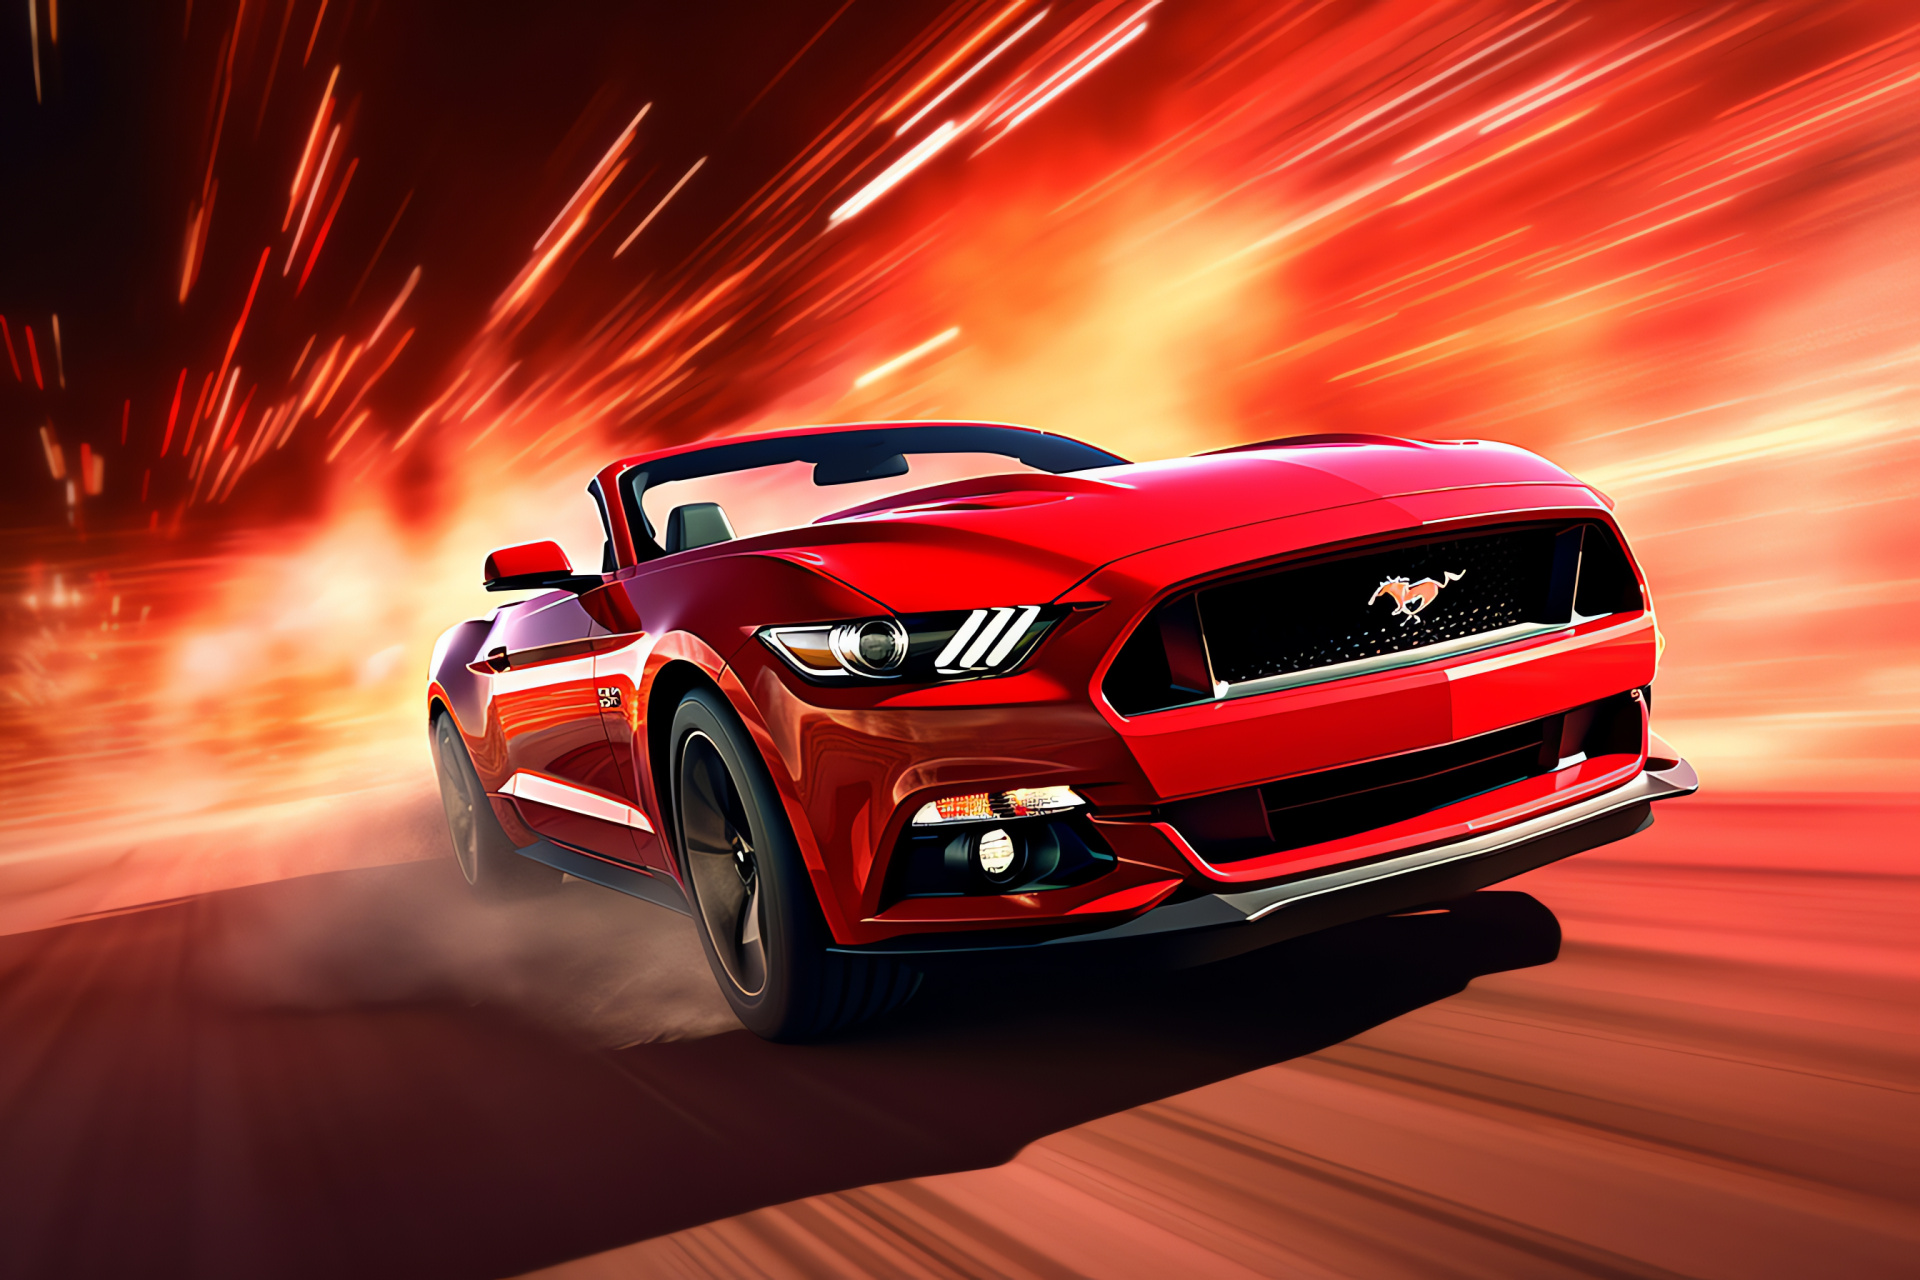 Ford Mustang, Striking red canvas, Muscle car legacy, Roadster profile, Electric motor sports, HD Desktop Wallpaper